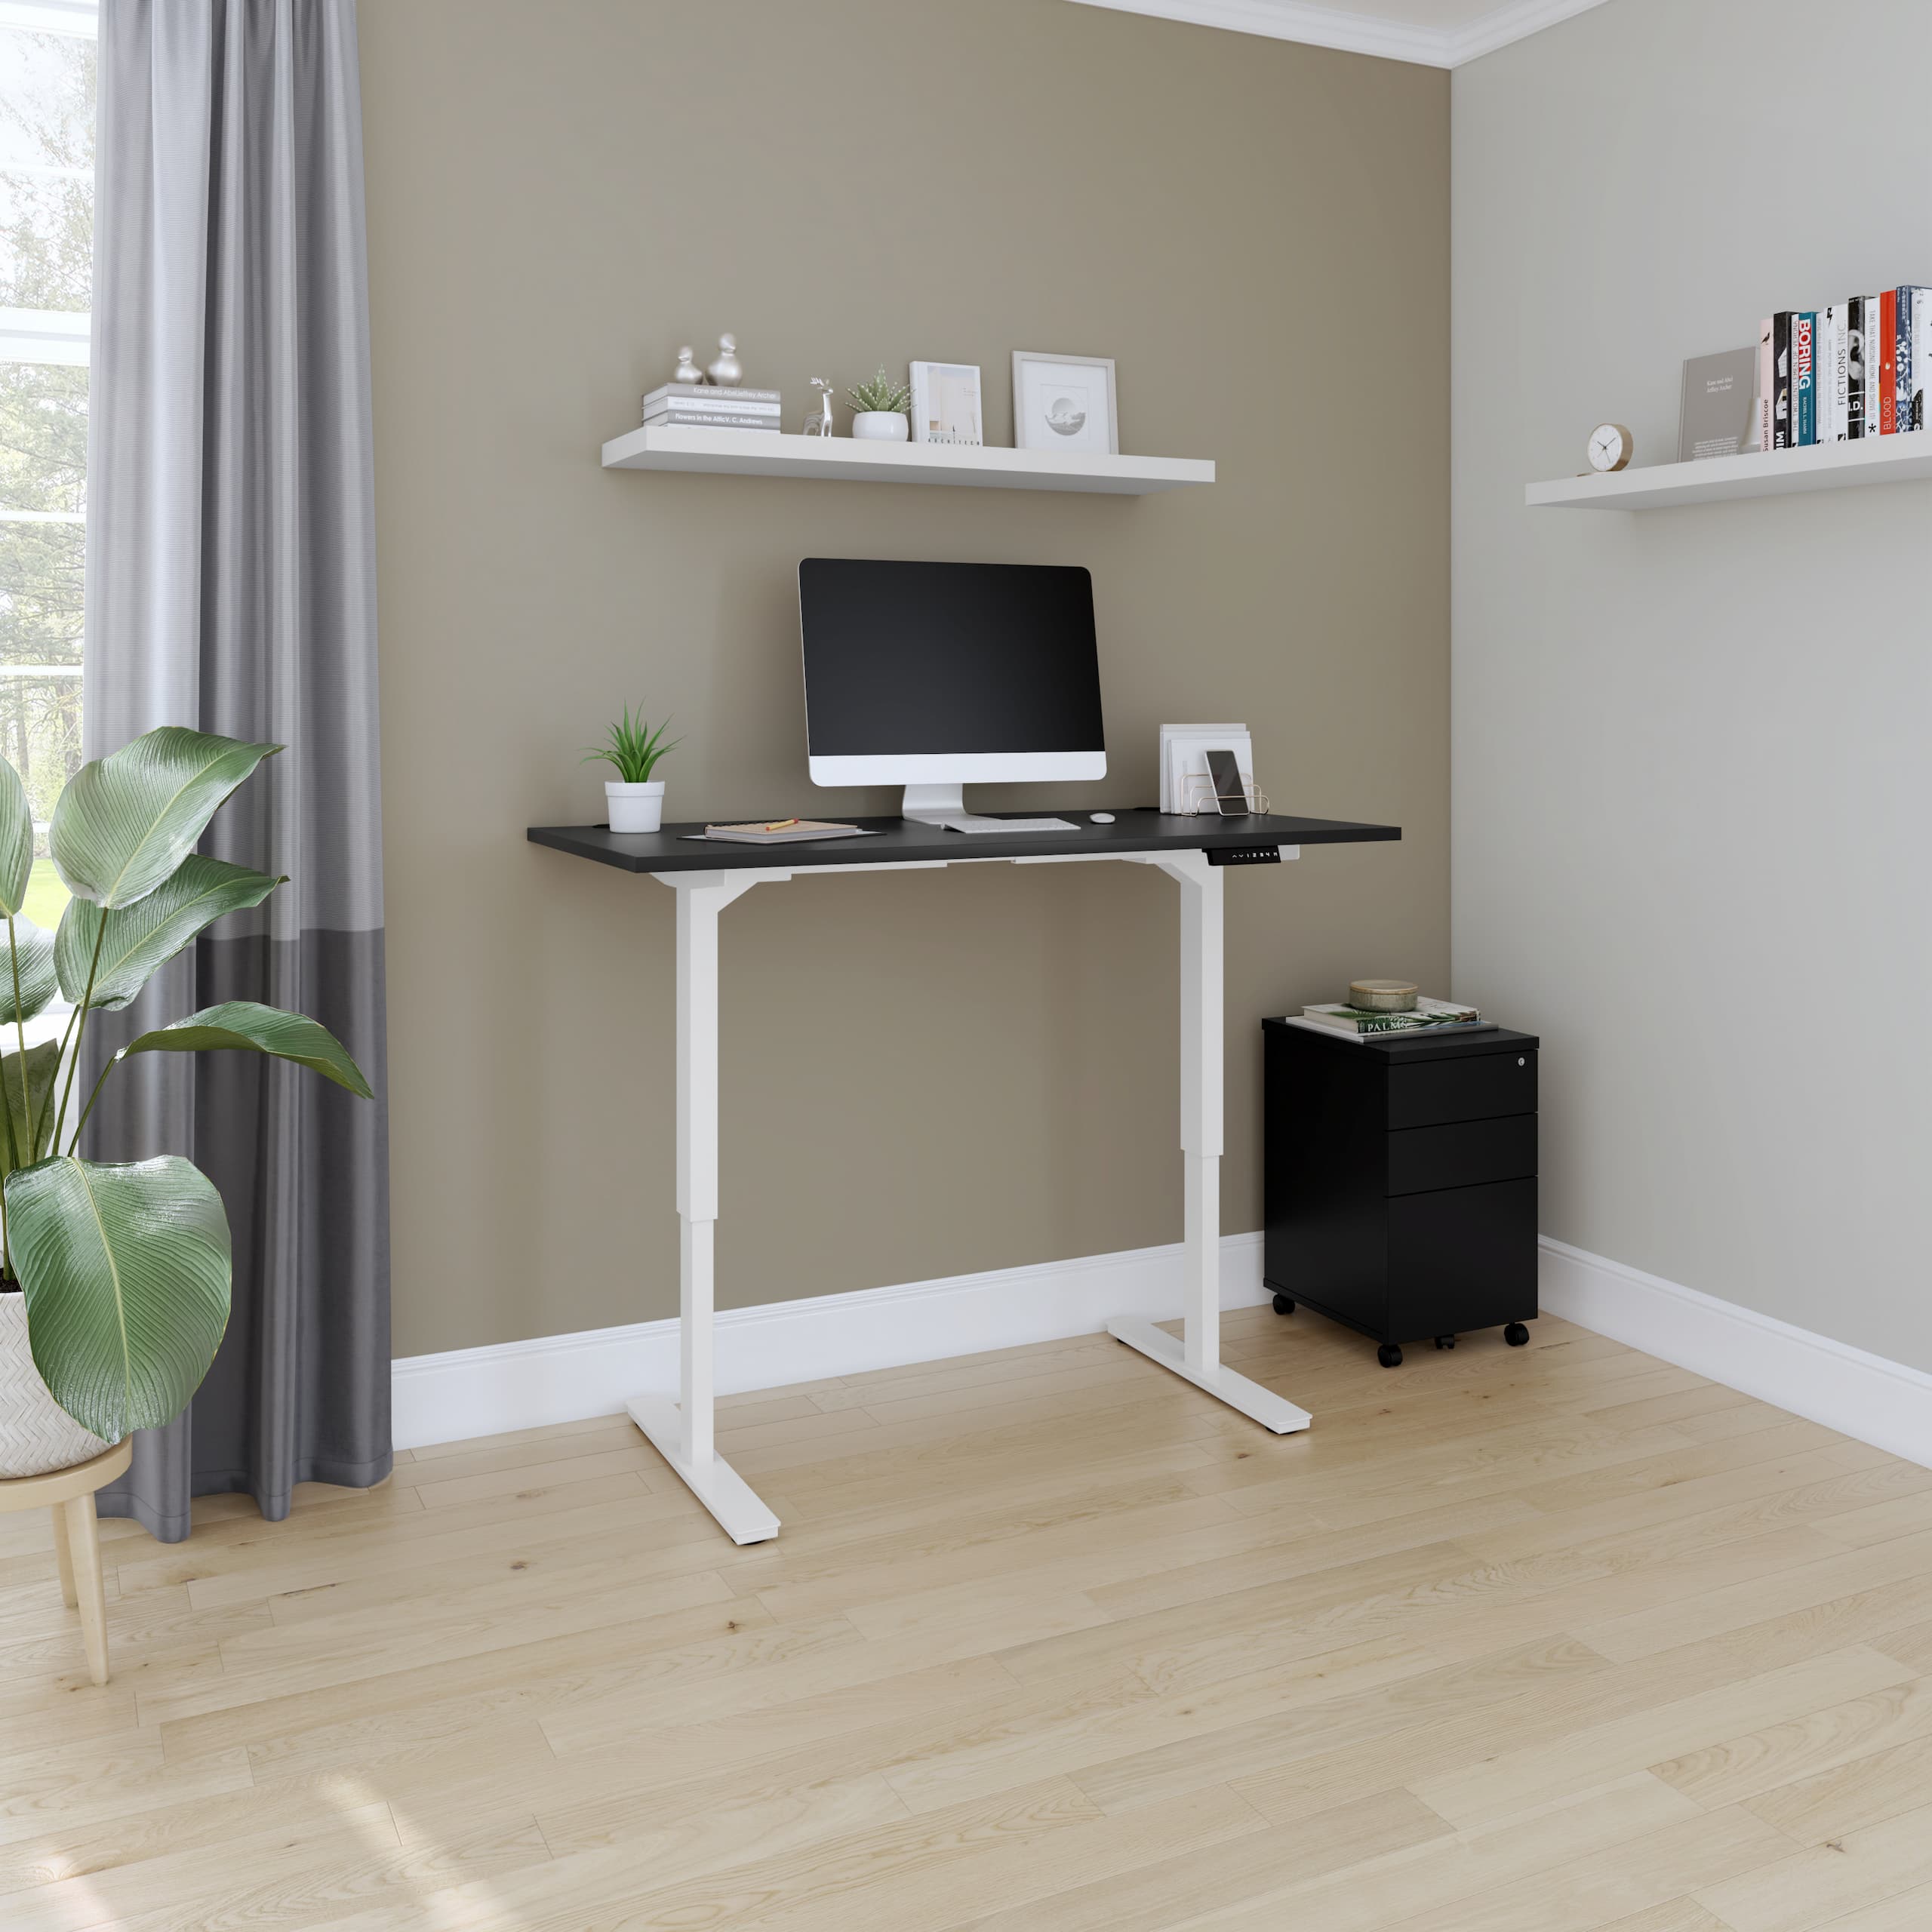 An ergonomic standing desk for a productive study space